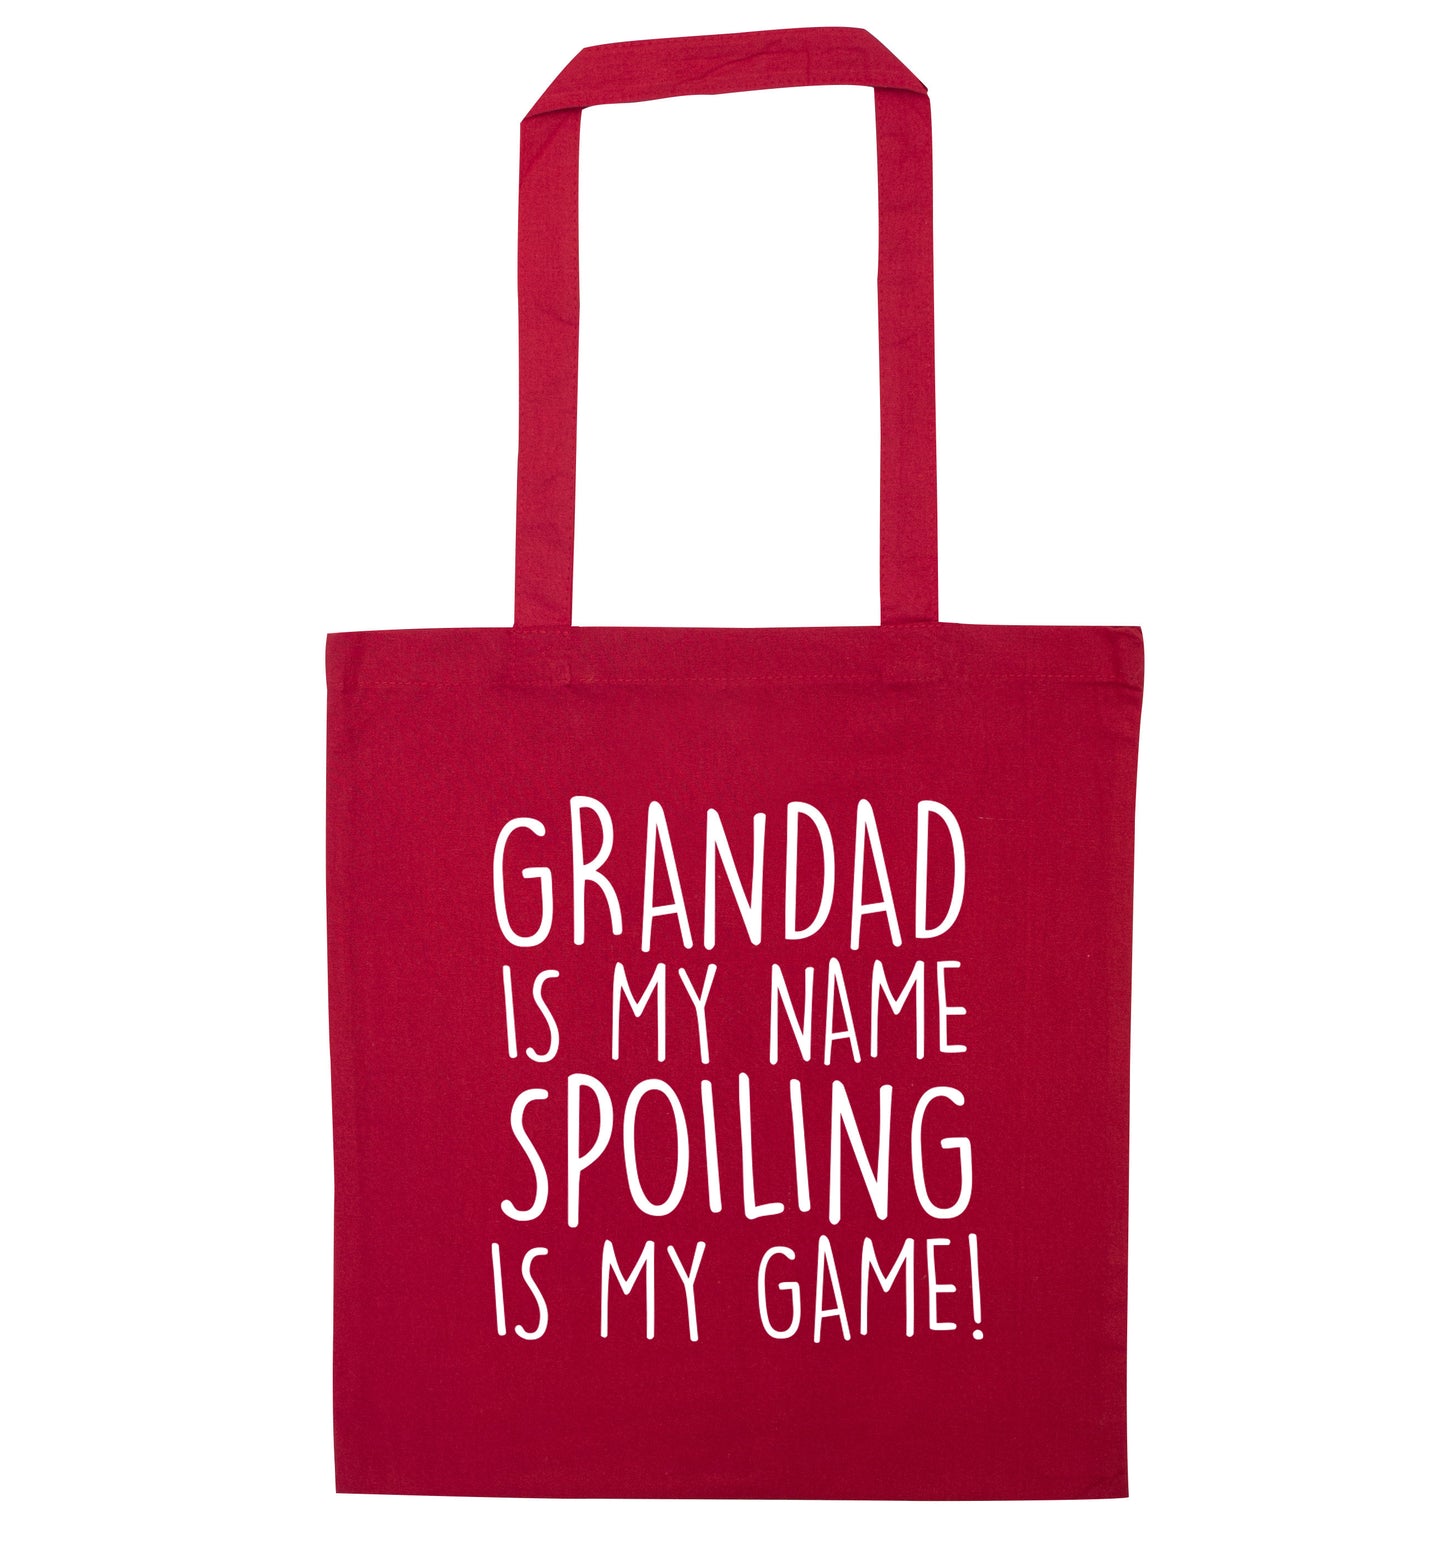 Grandad is my name, spoiling is my game red tote bag